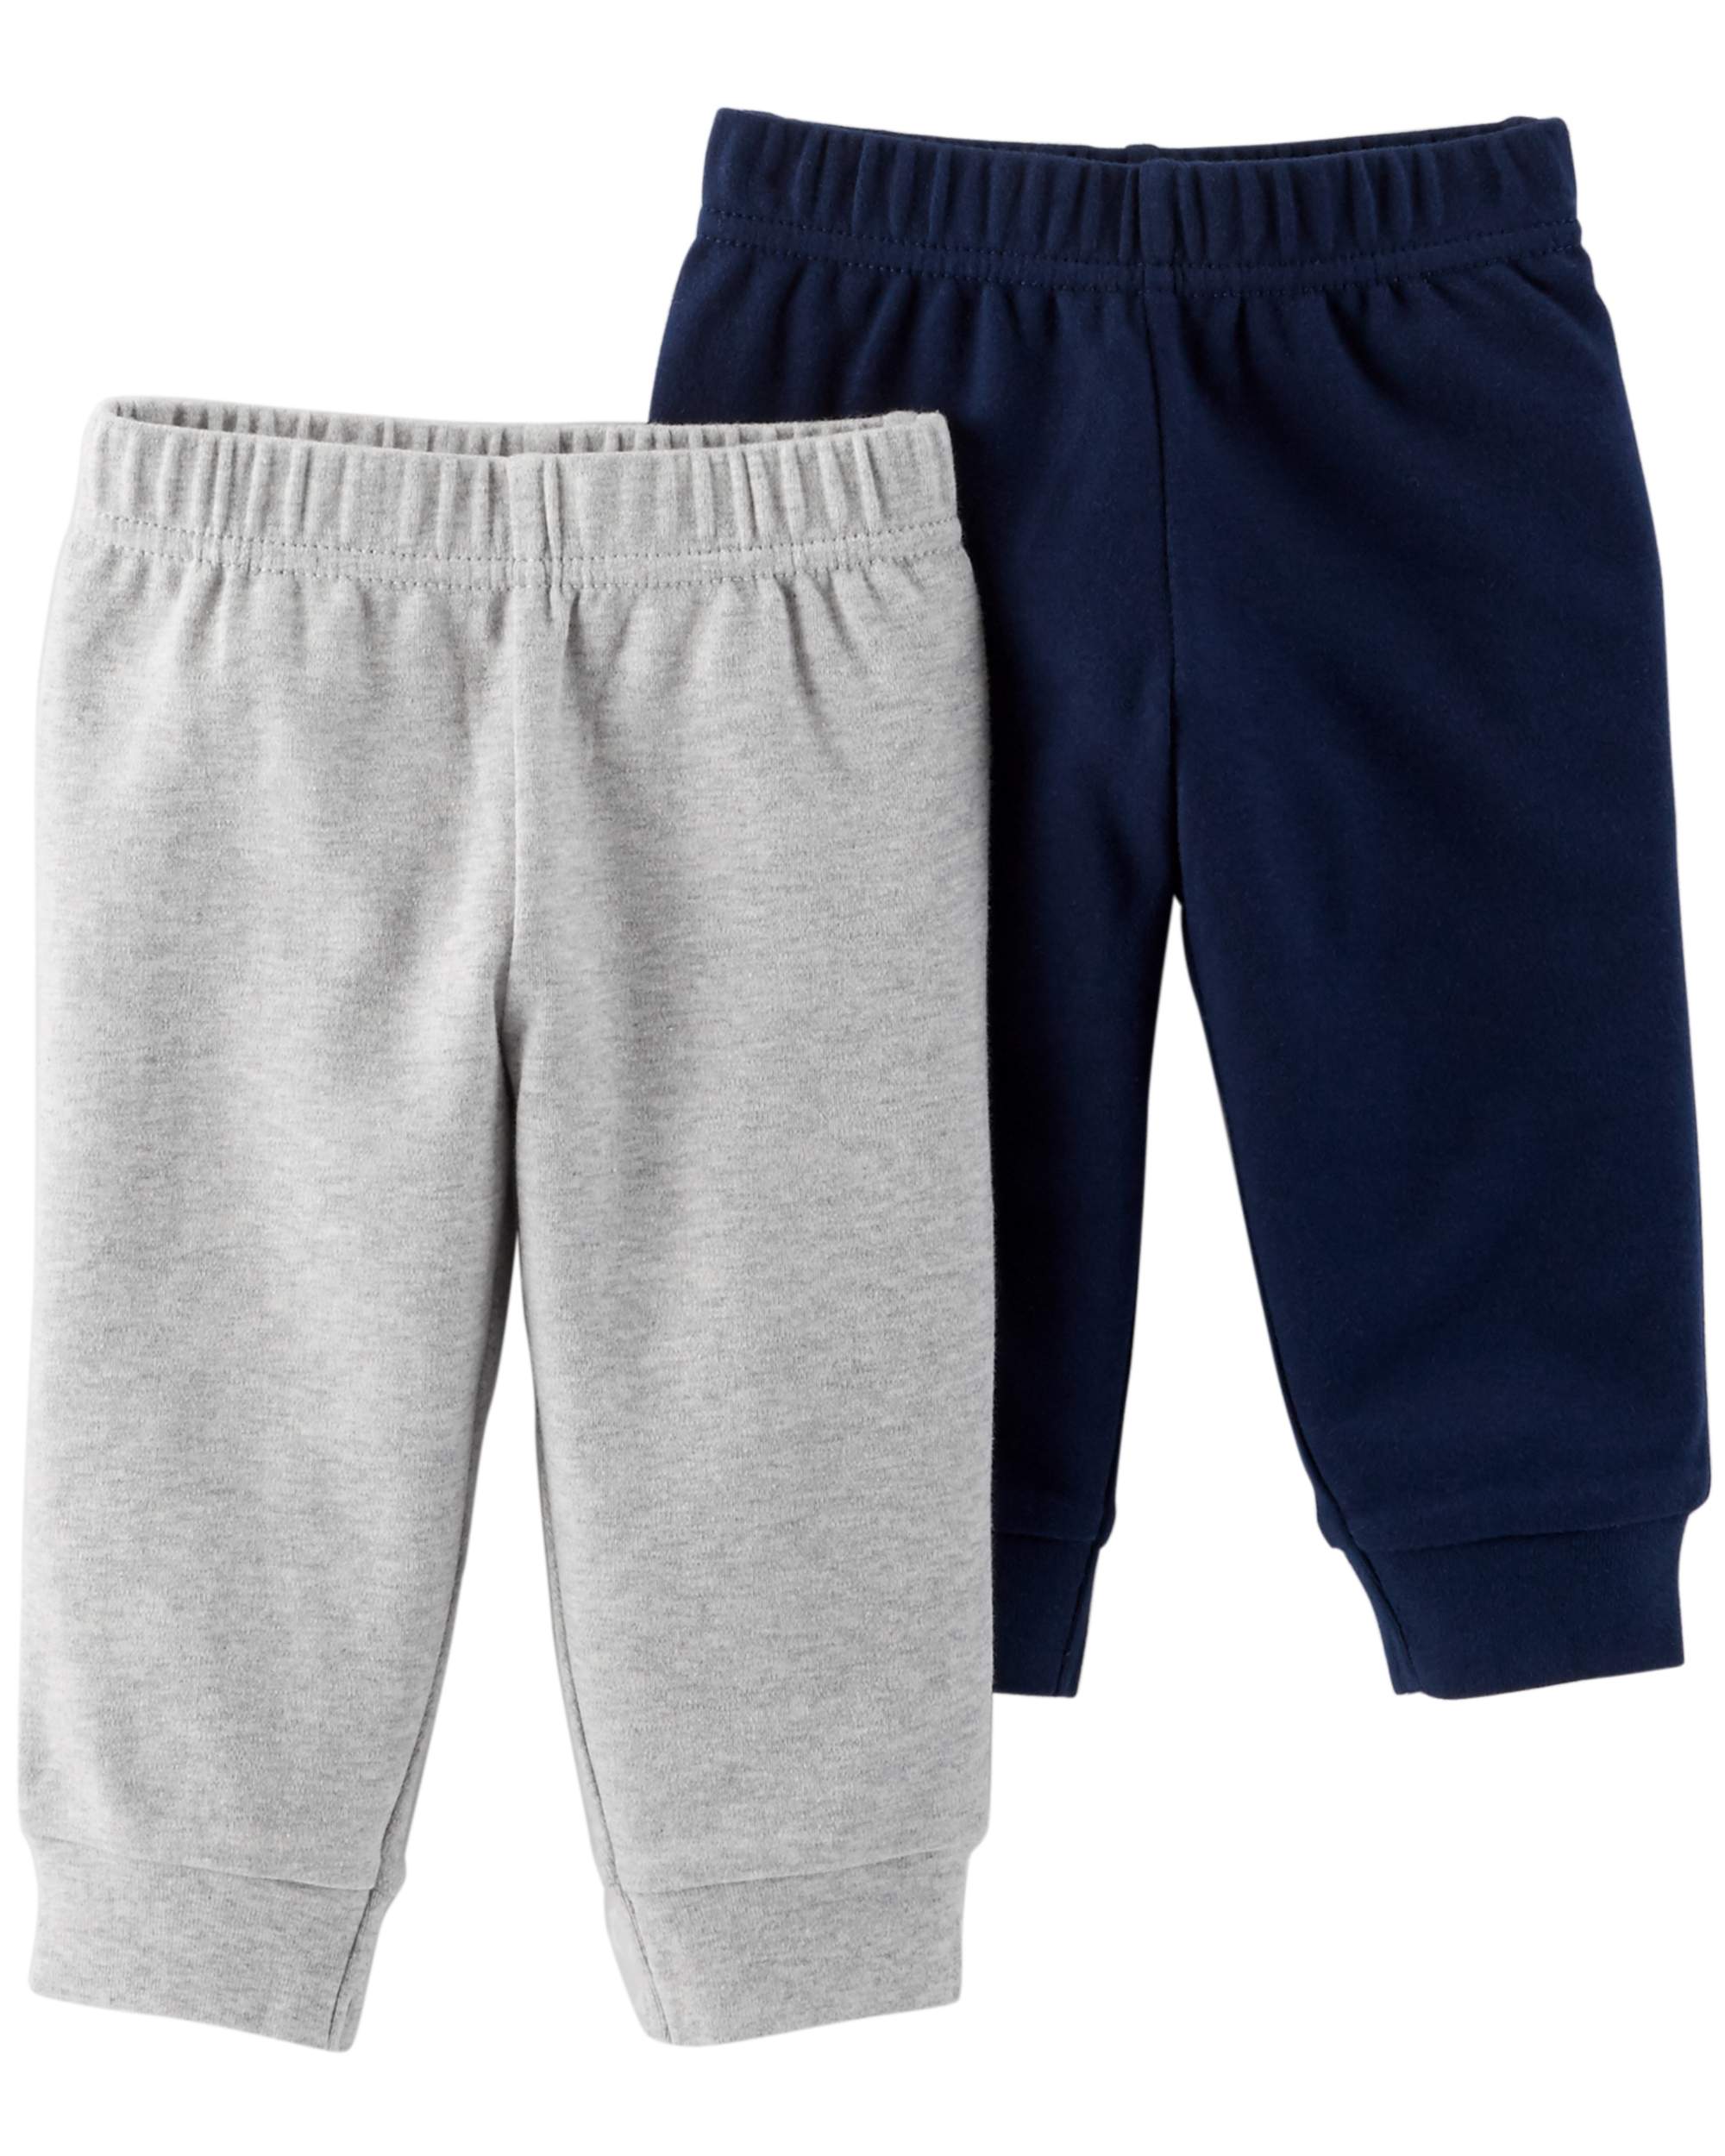 Carter's Child of Mine Pants, 2-pack (Baby Boys) - image 1 of 3